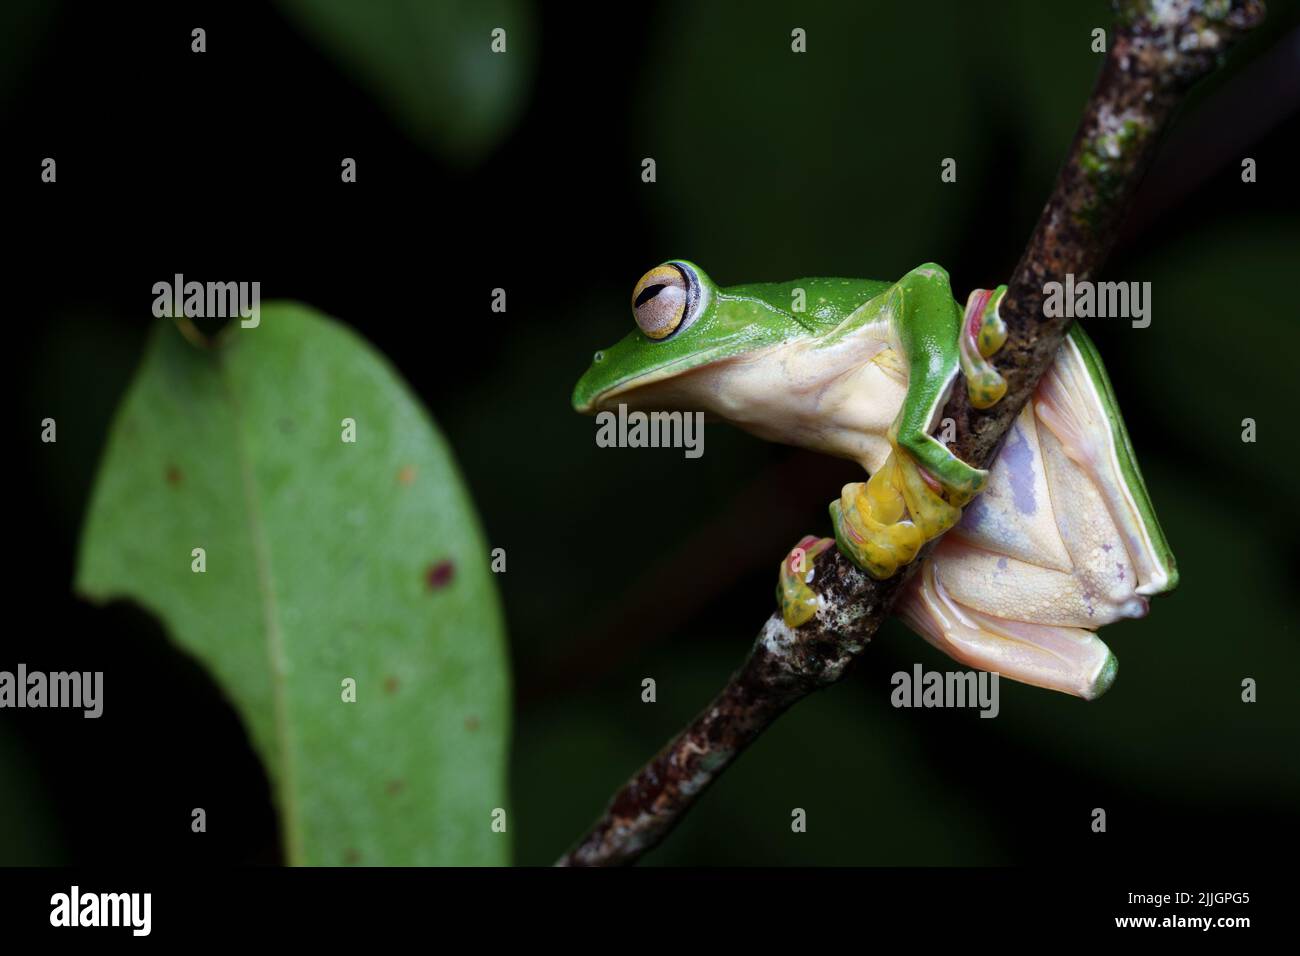 Malabar gliding frog (Rhacophorus malabaricus) is a rhacophorid tree frog species found in the Western Ghats of India. Stock Photo